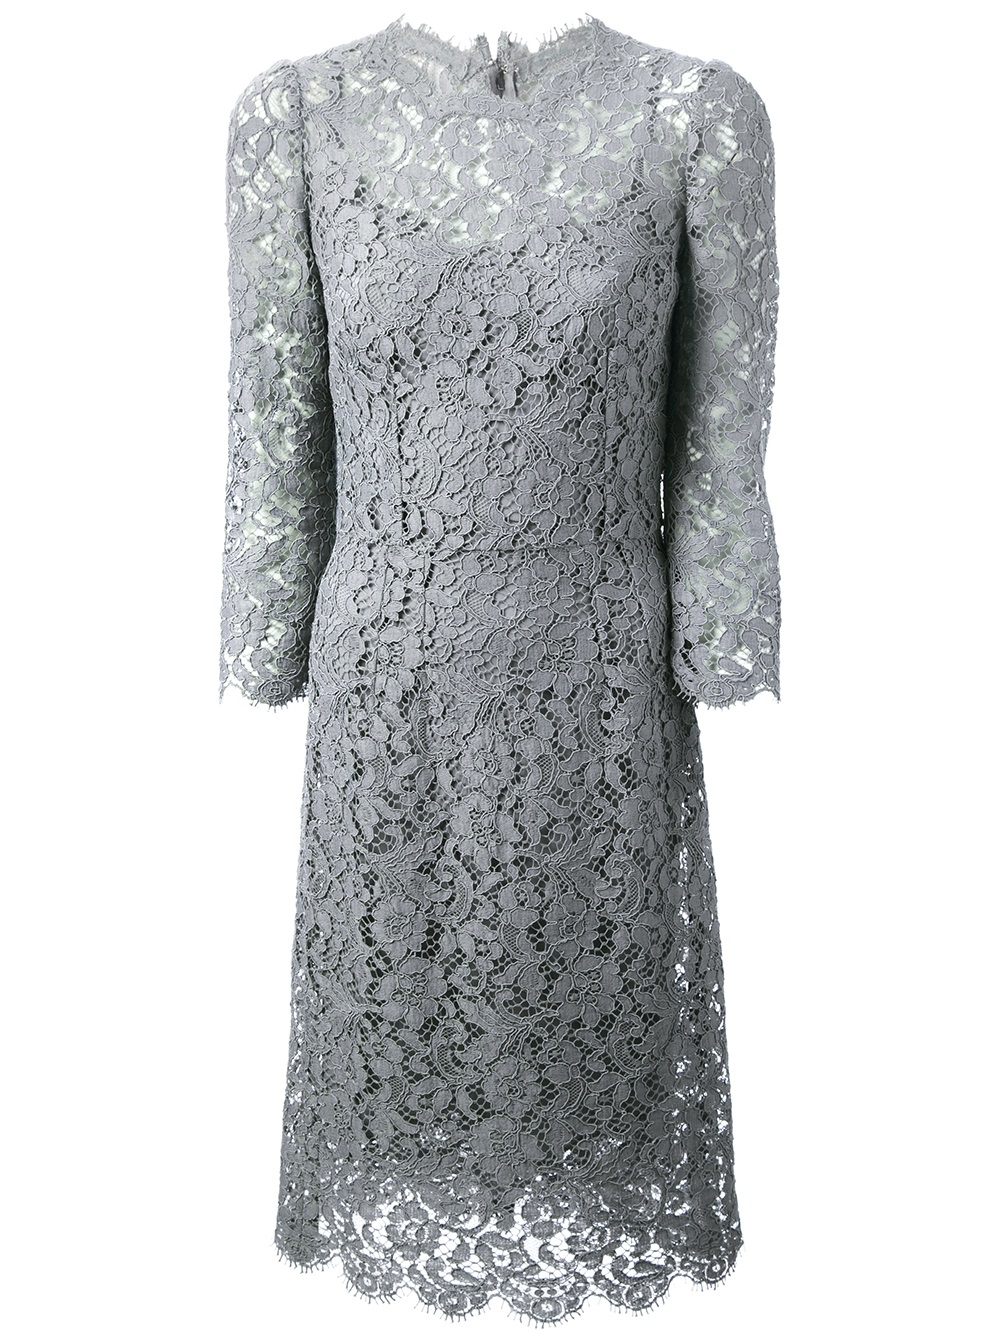 Dolce & Gabbana Floral Lace Dress in Gray | Lyst